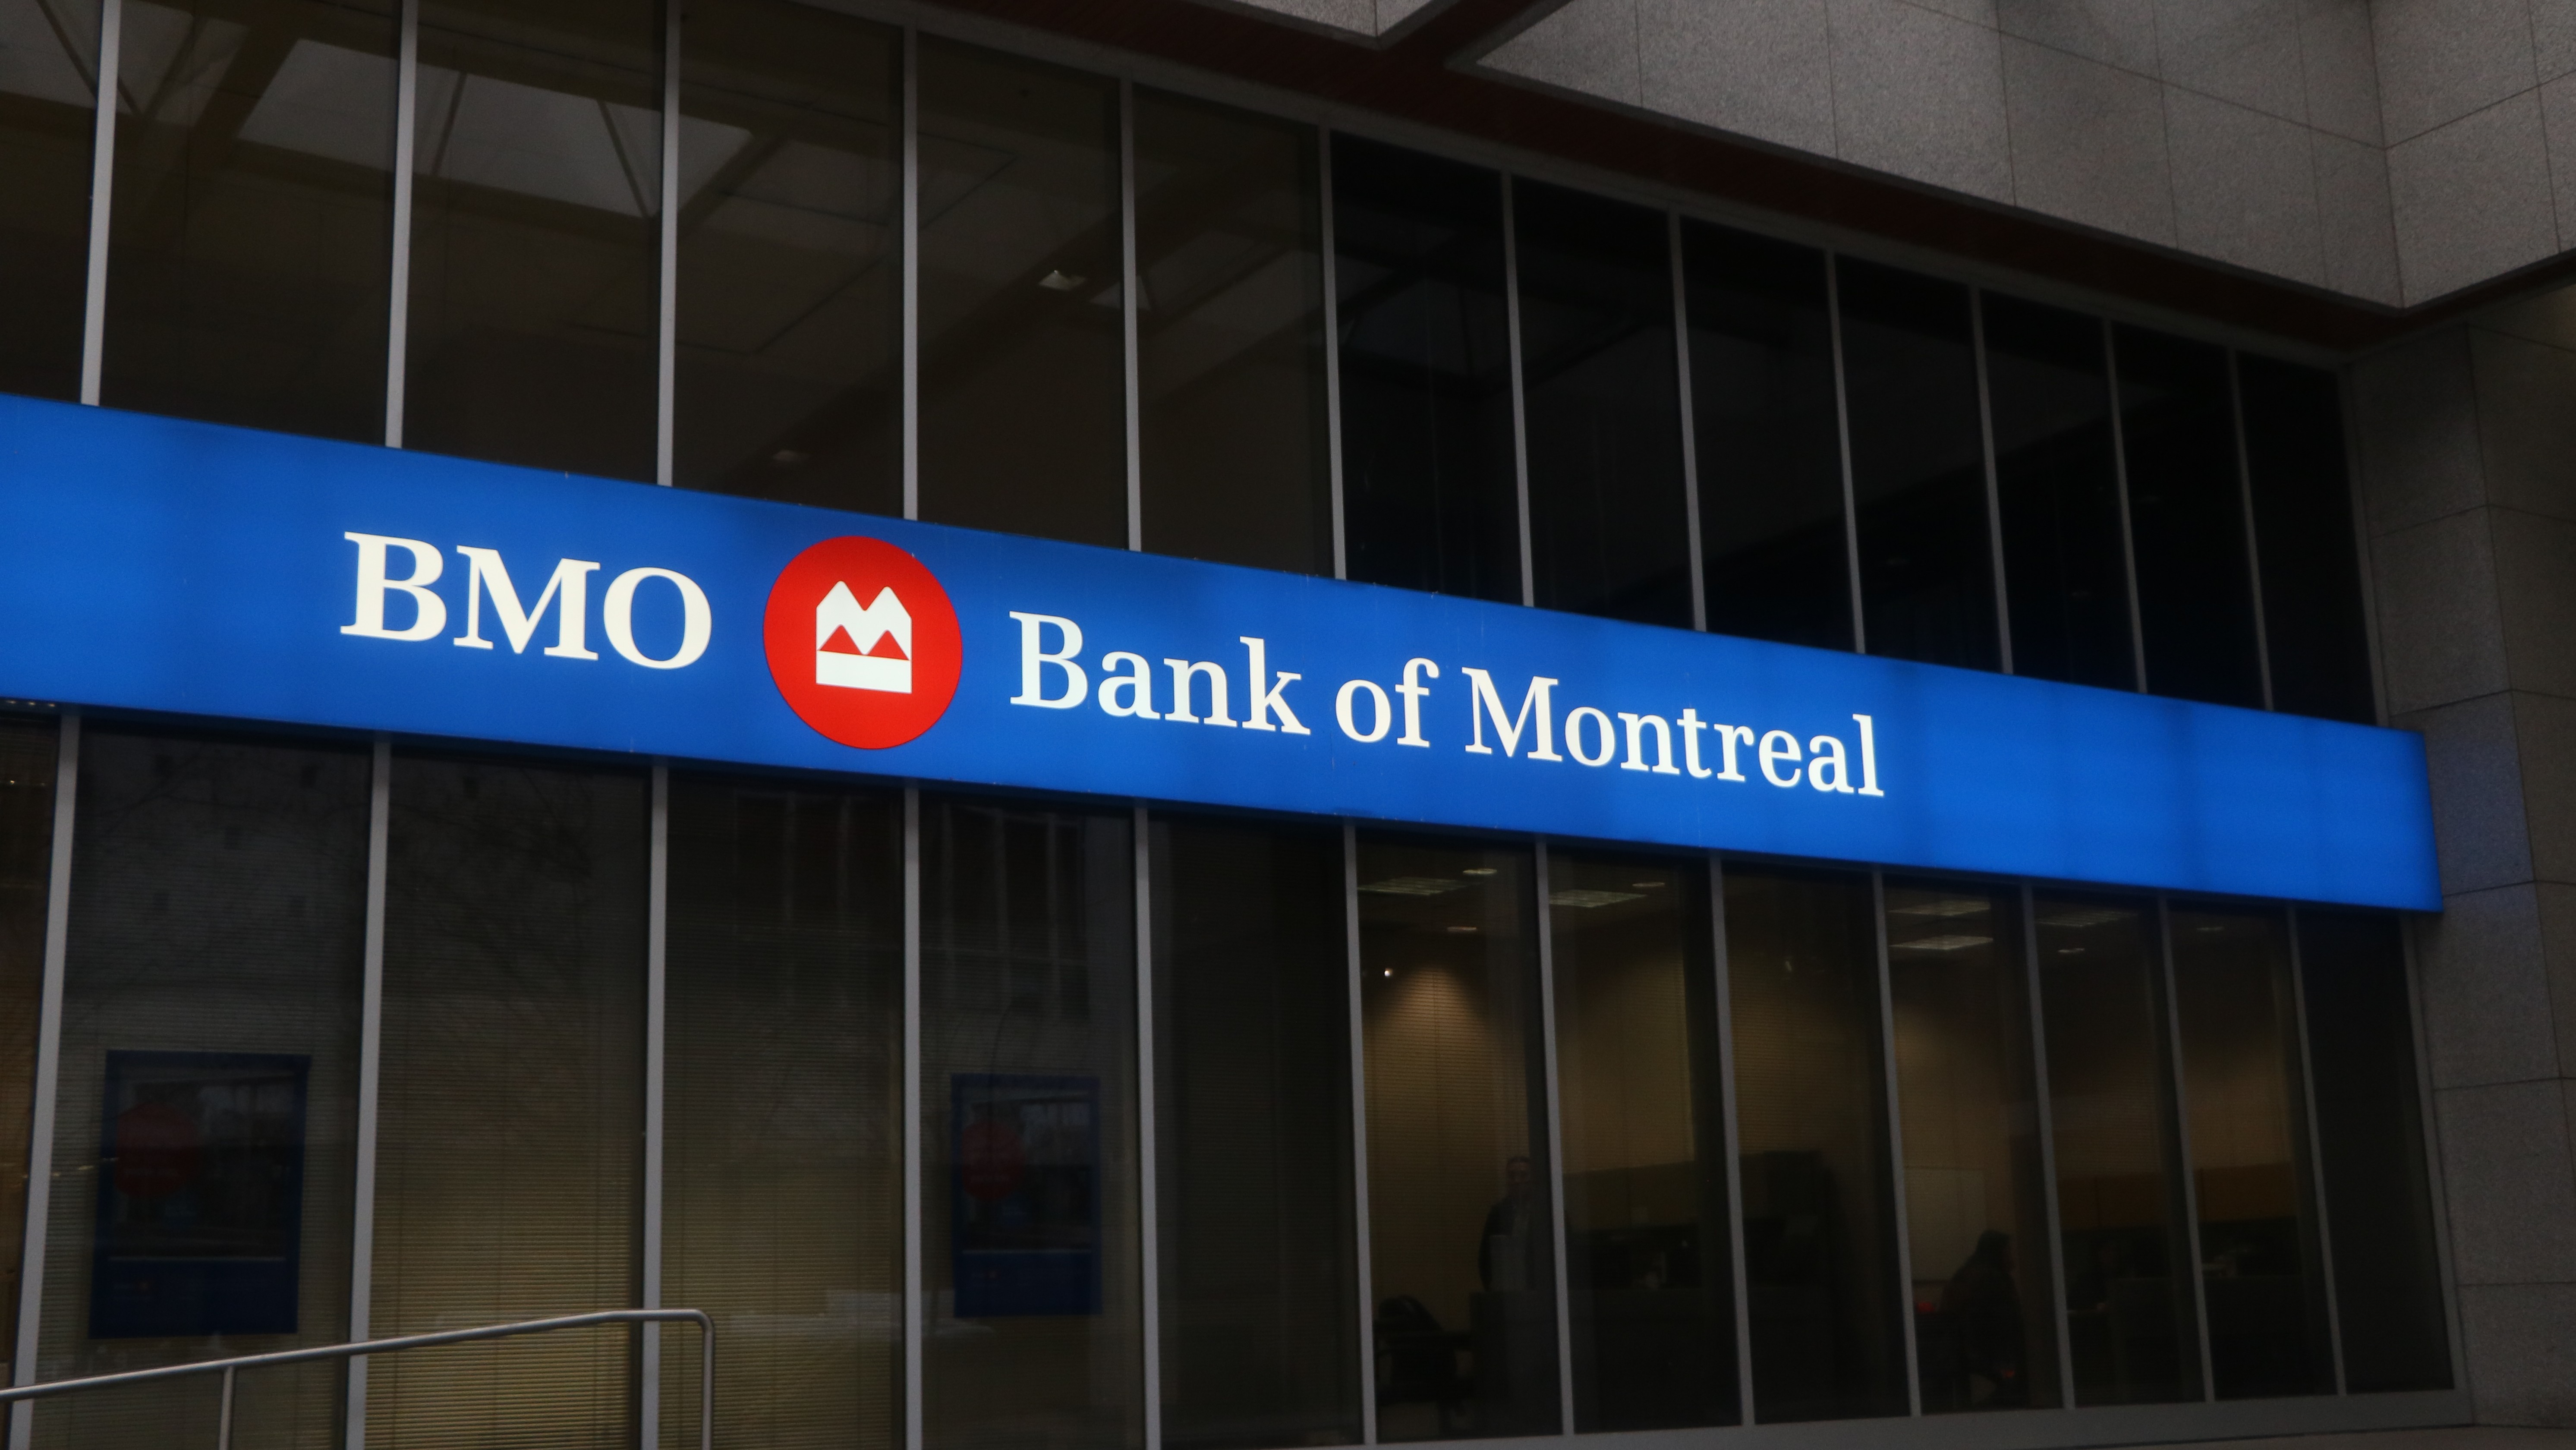 Arrest Of Indigenous Girl Grandfather At Vancouver Bmo Prompts